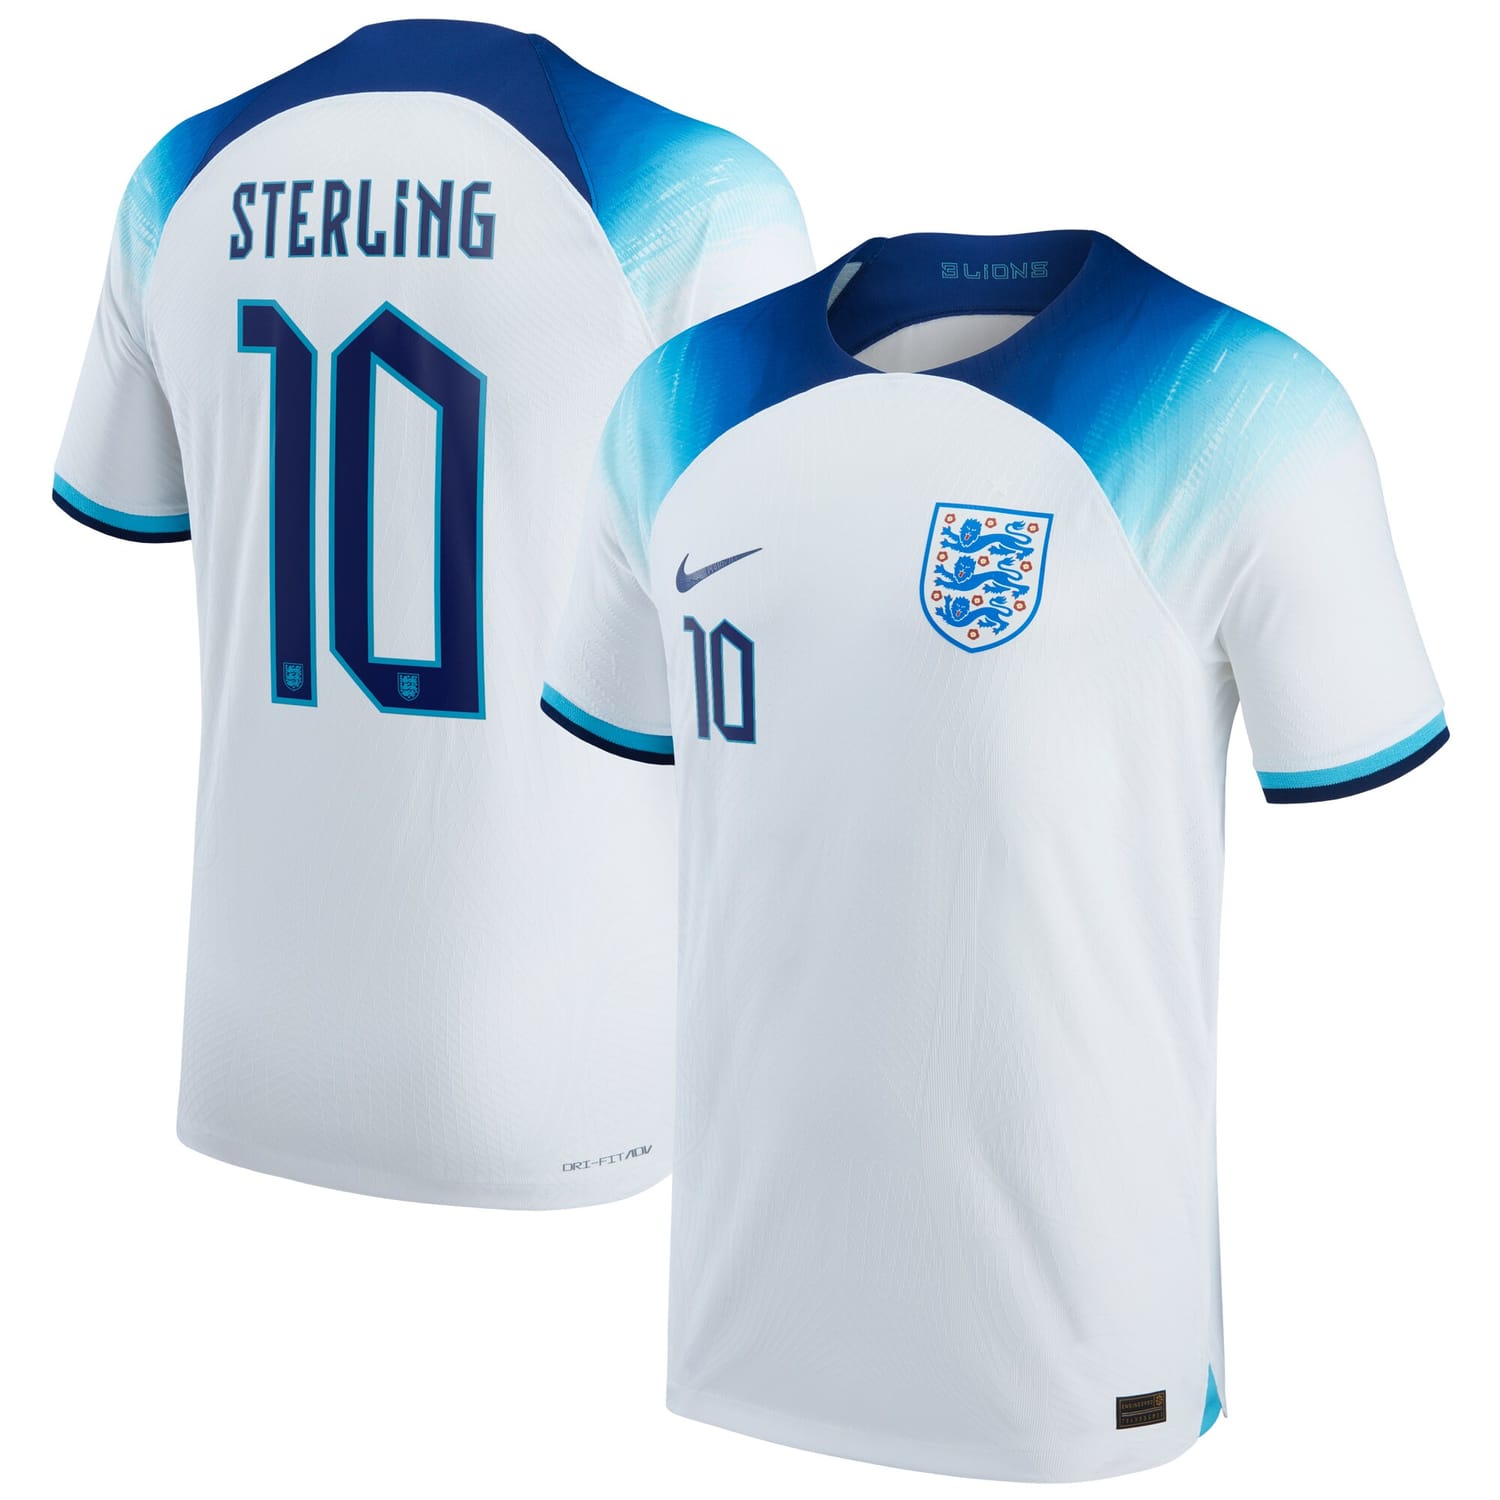 England National Team Home Authentic Jersey Shirt White 2022-23 player Raheem Sterling printing for Men